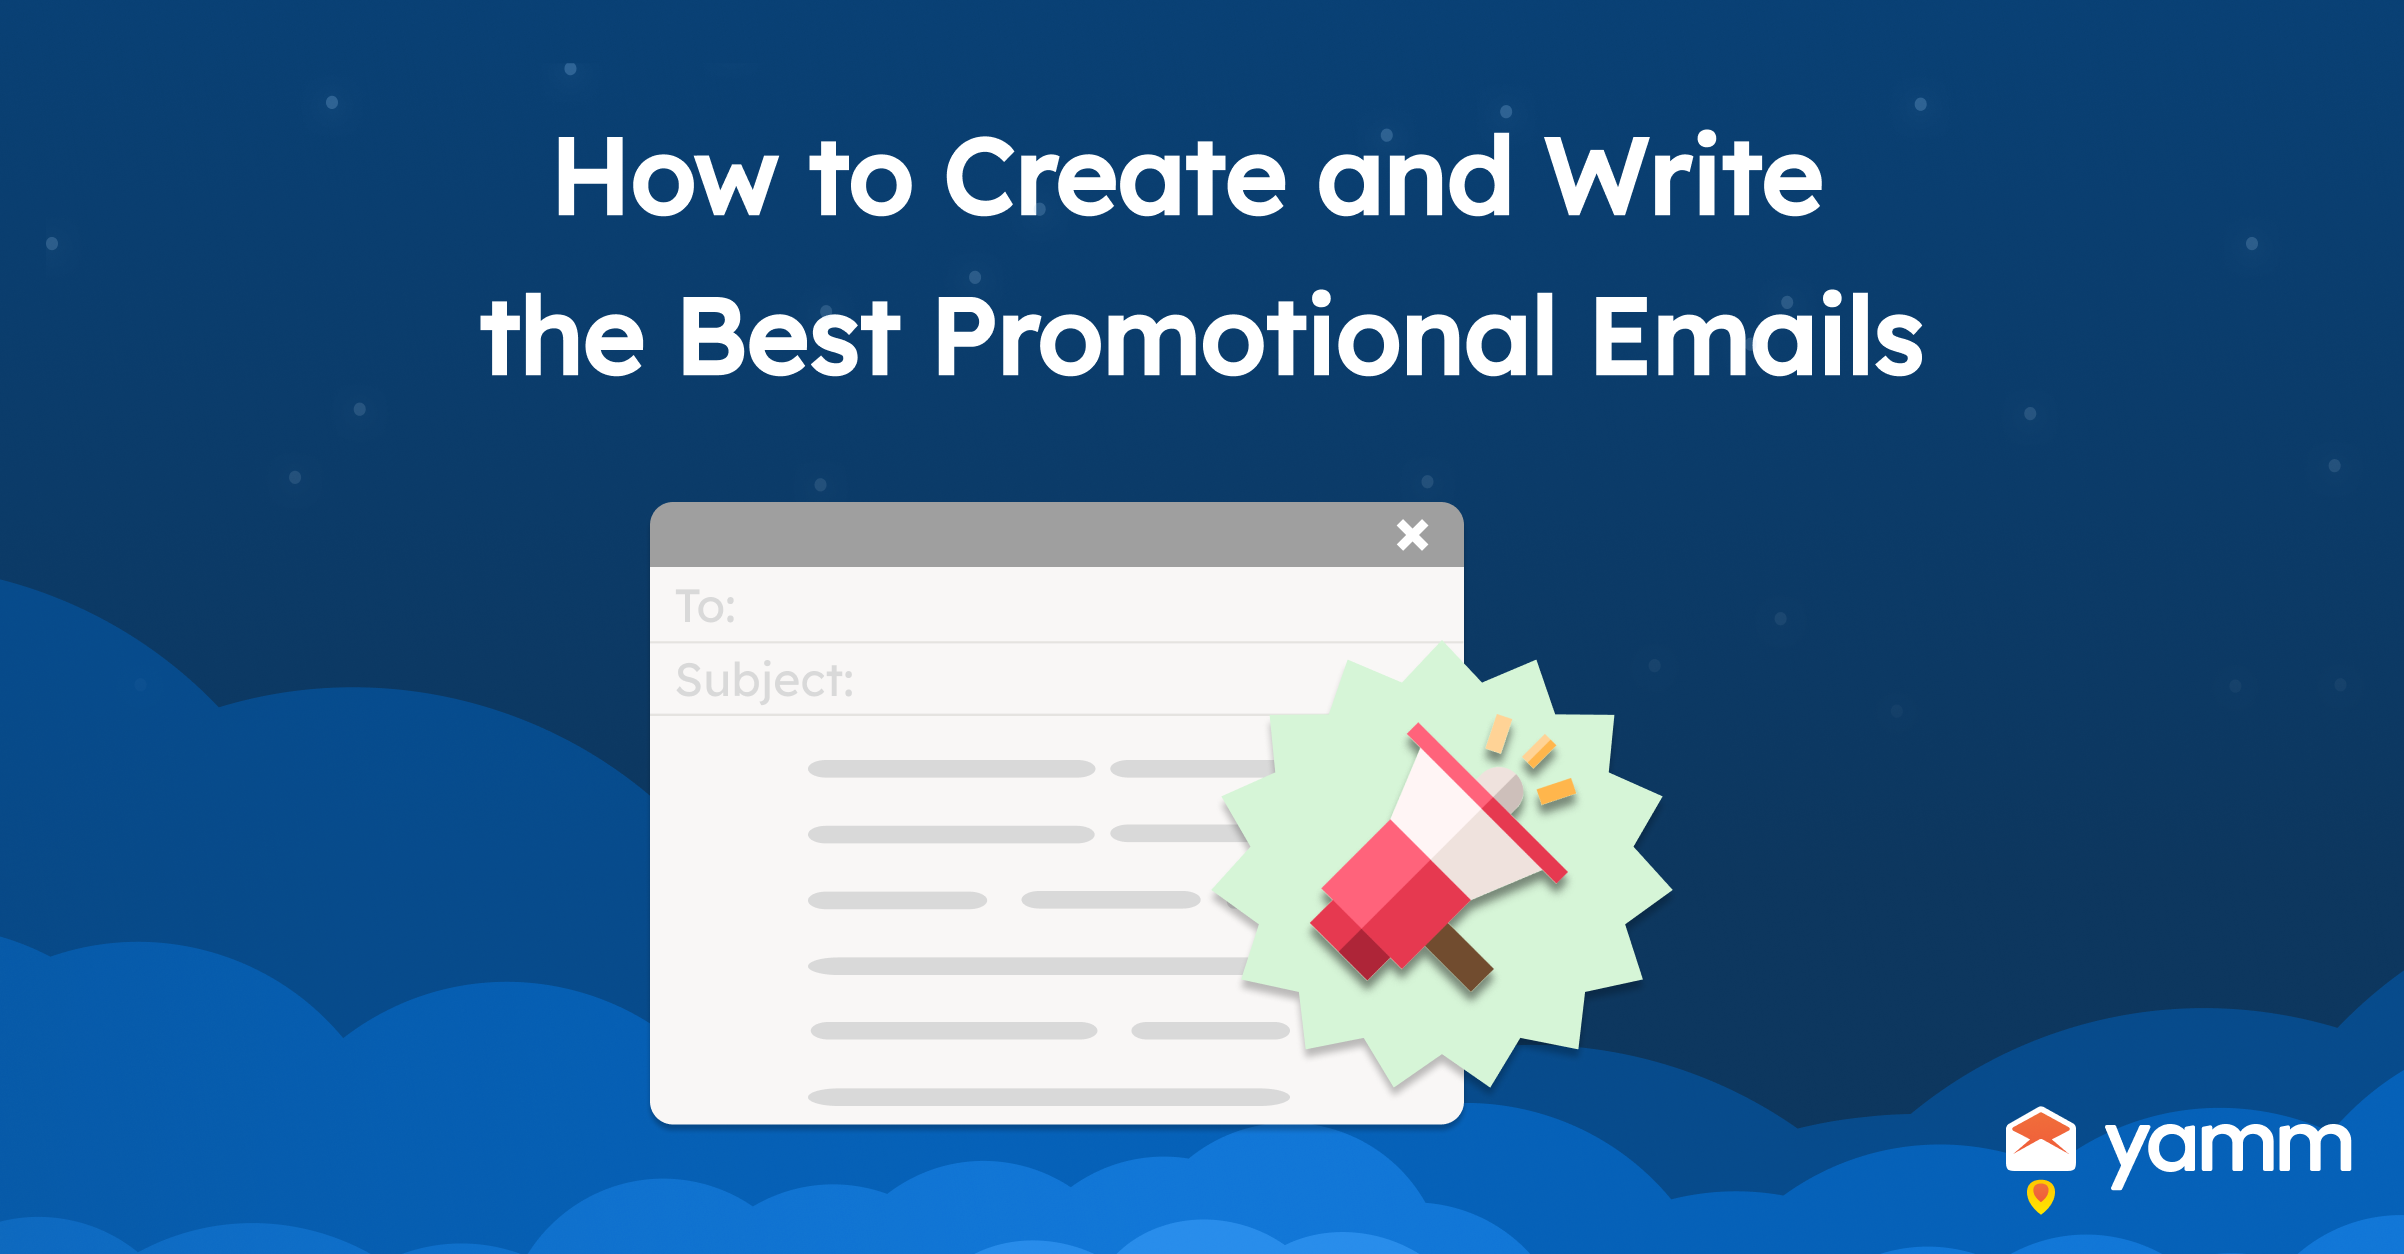 How to Create and Write the Best Promotional Emails